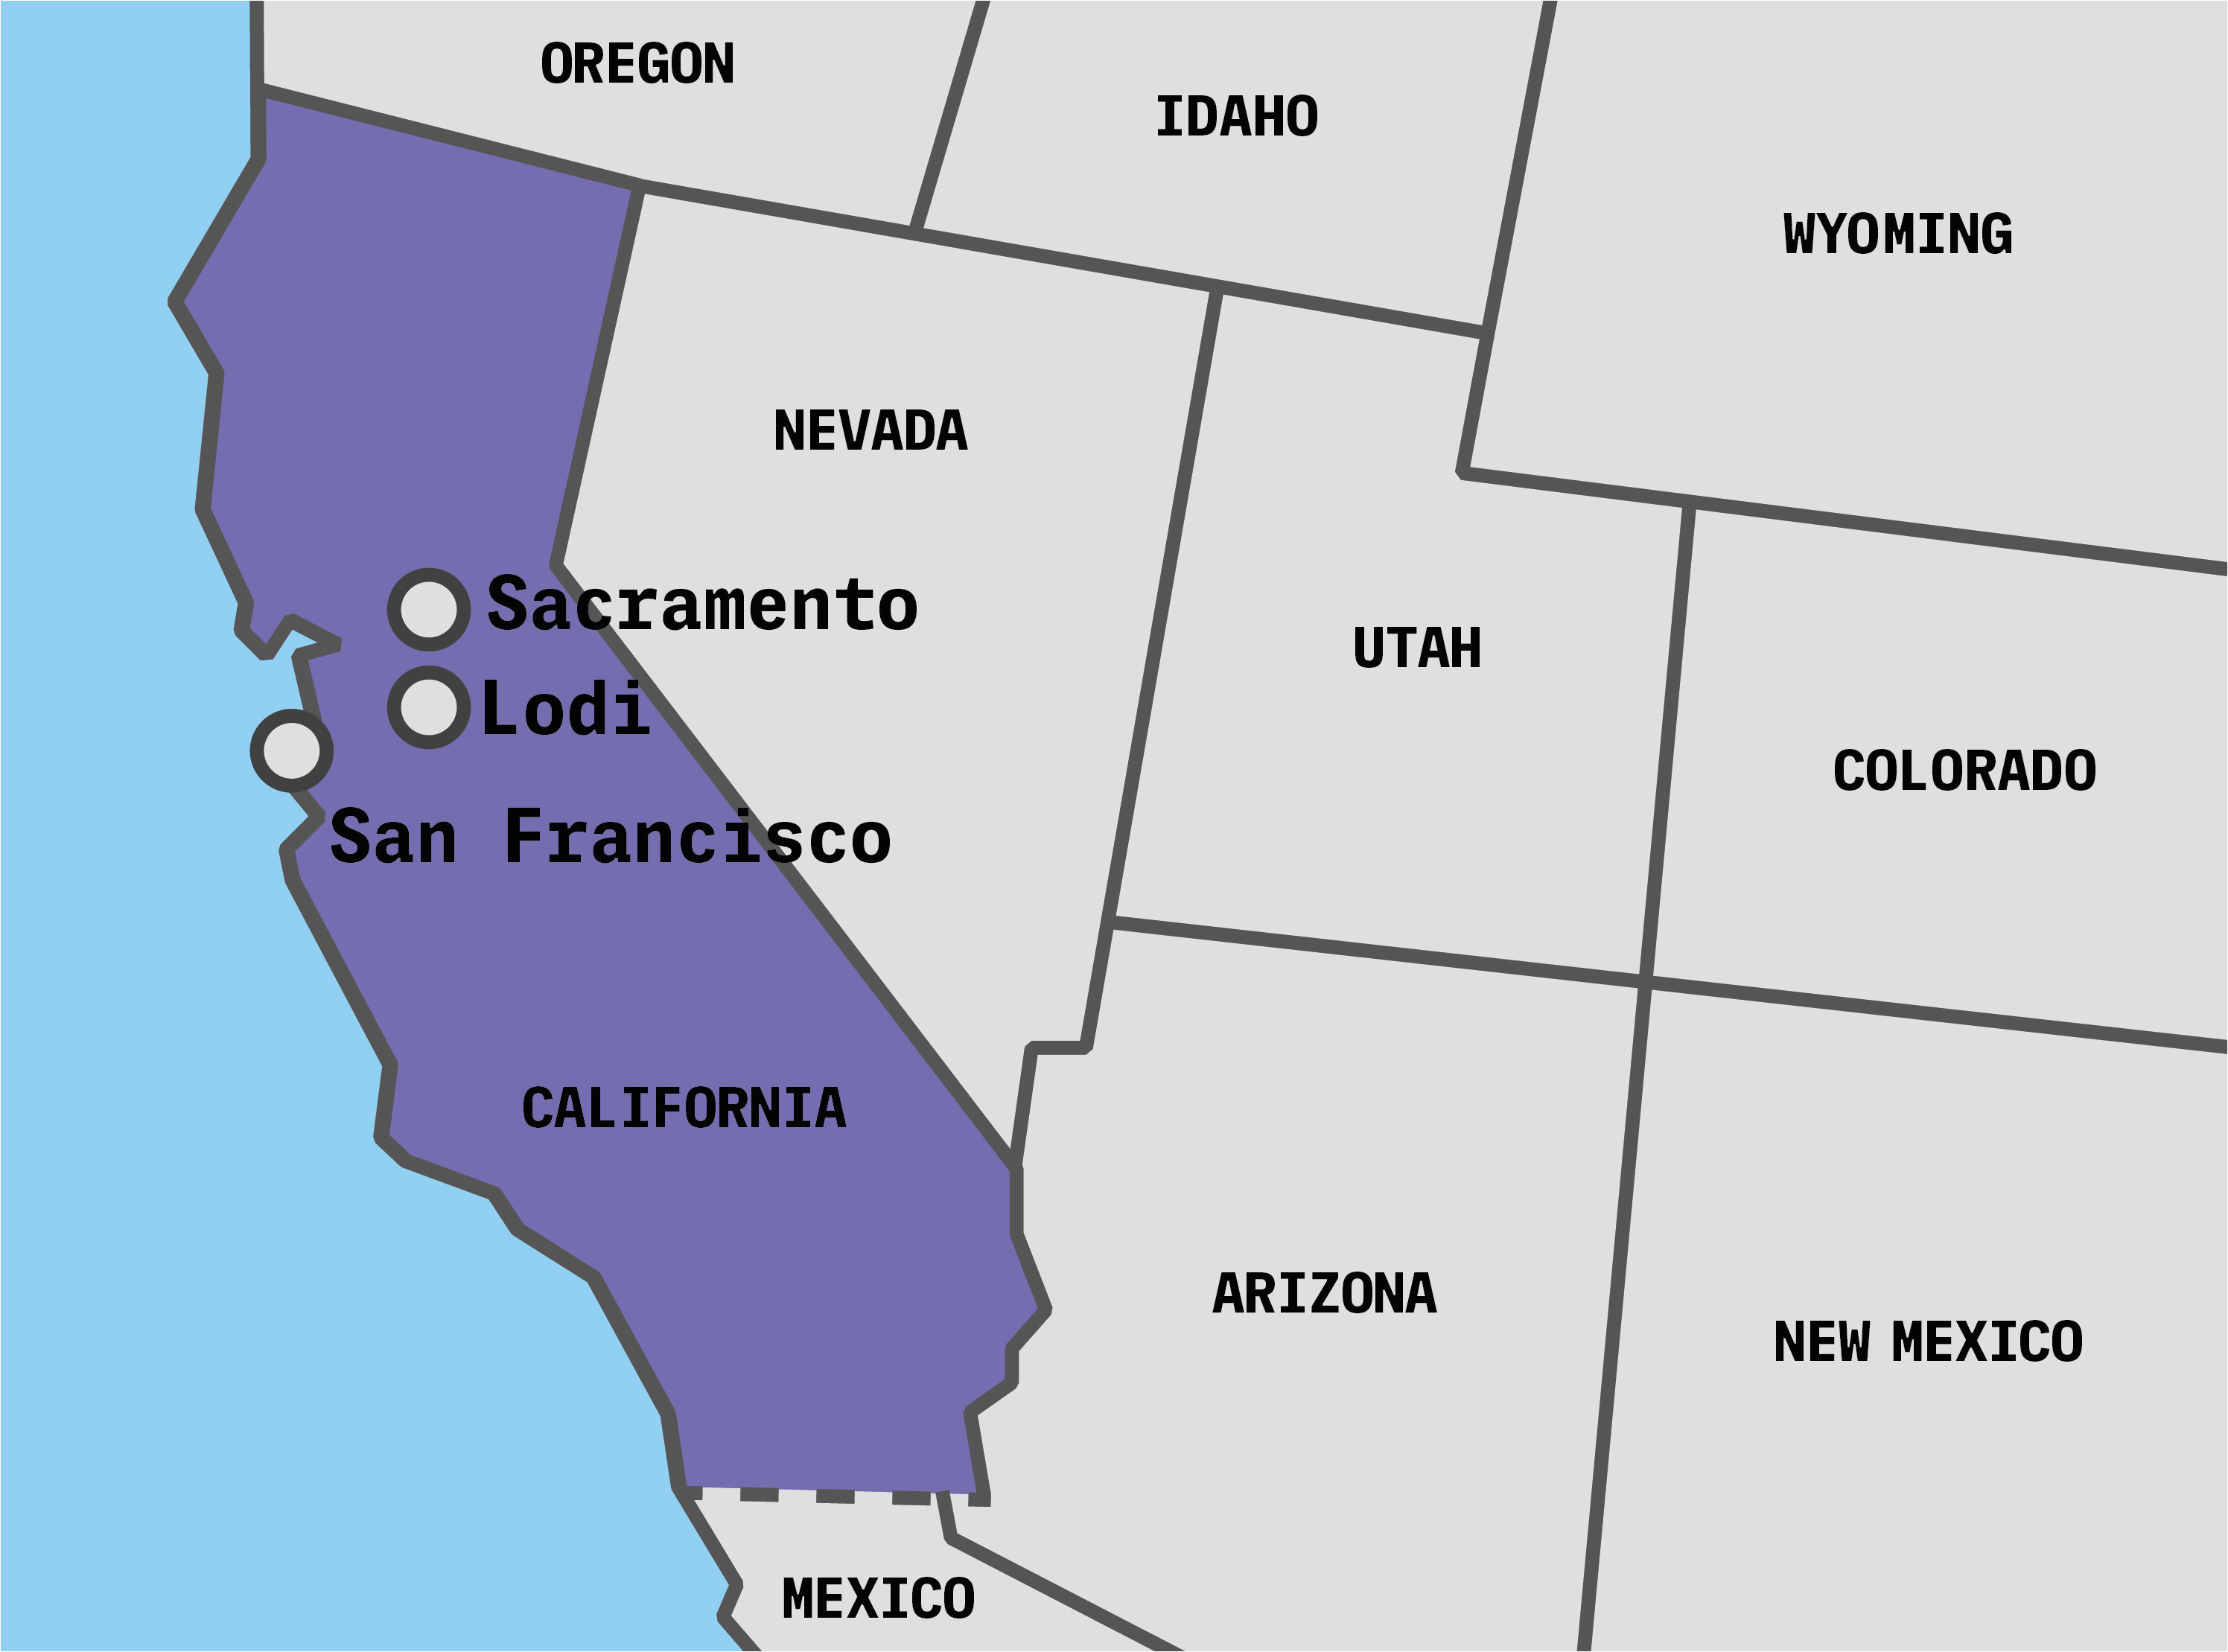 sex offender registry california map fresh more maps of the american